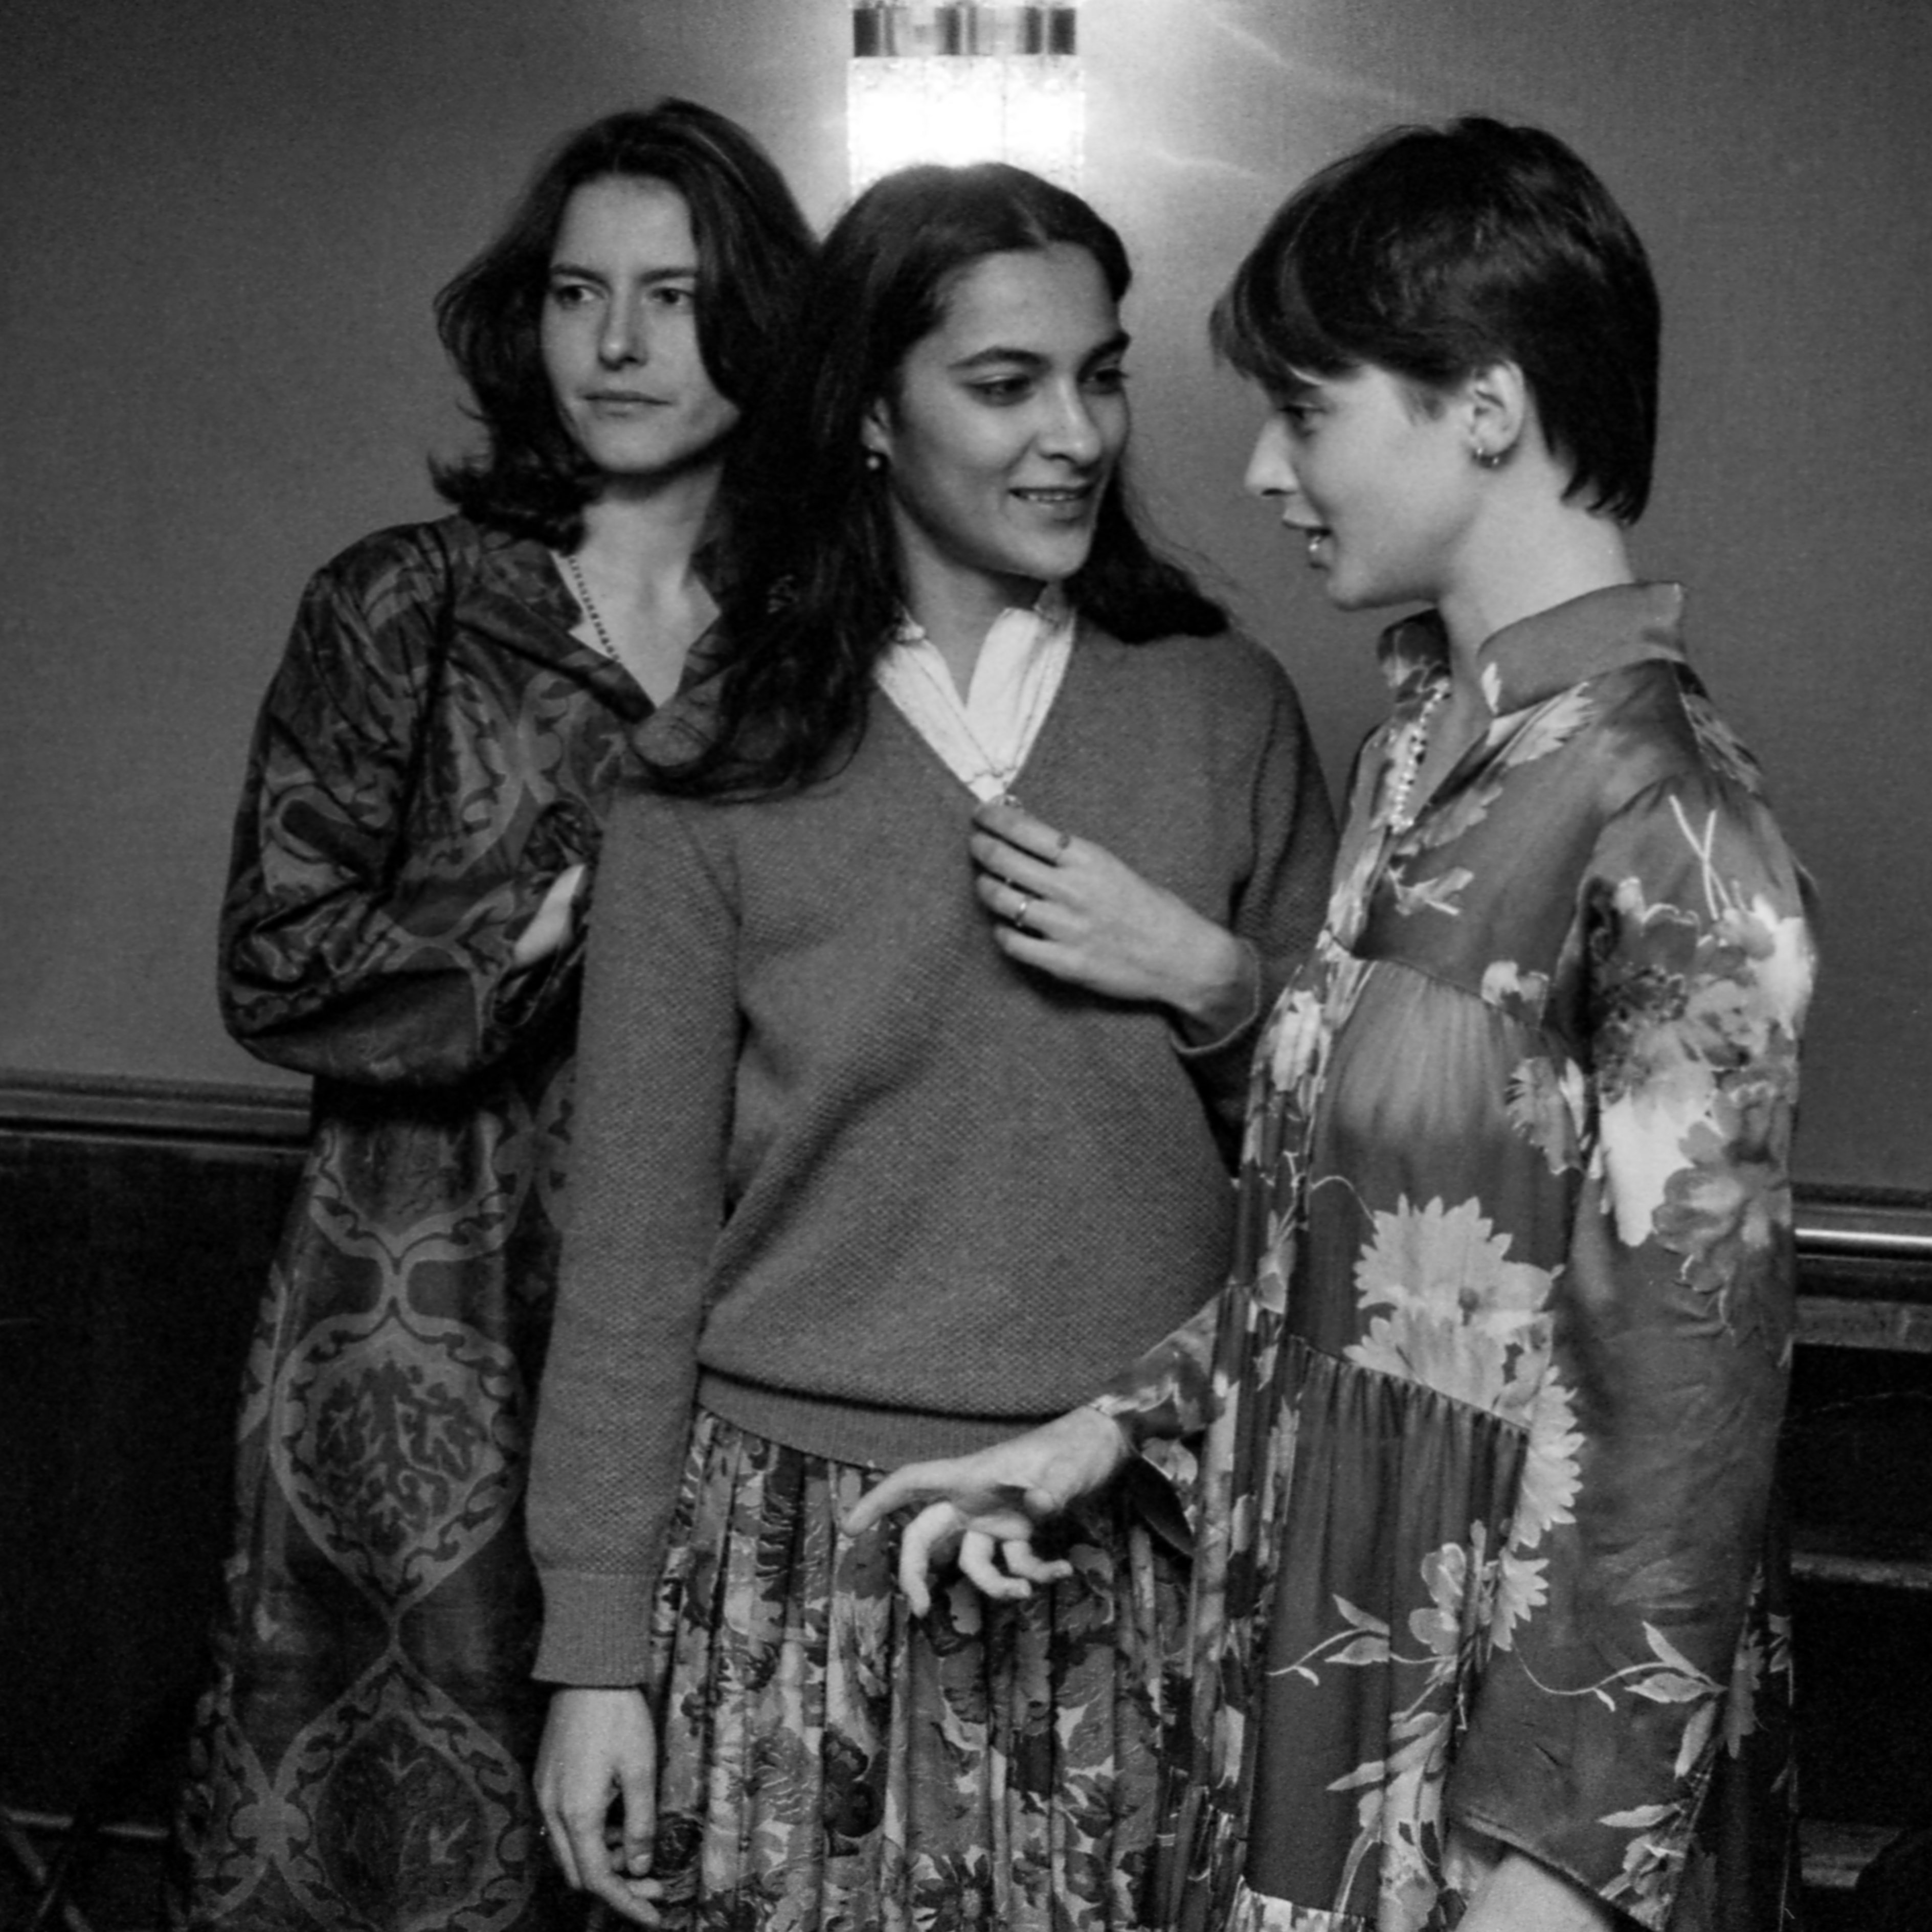 Isotta Rossellini, Raffaella Rossellini, and Isabella Rossellini at an event in tribute to their father on December 15, 1981 | Source: Getty Images